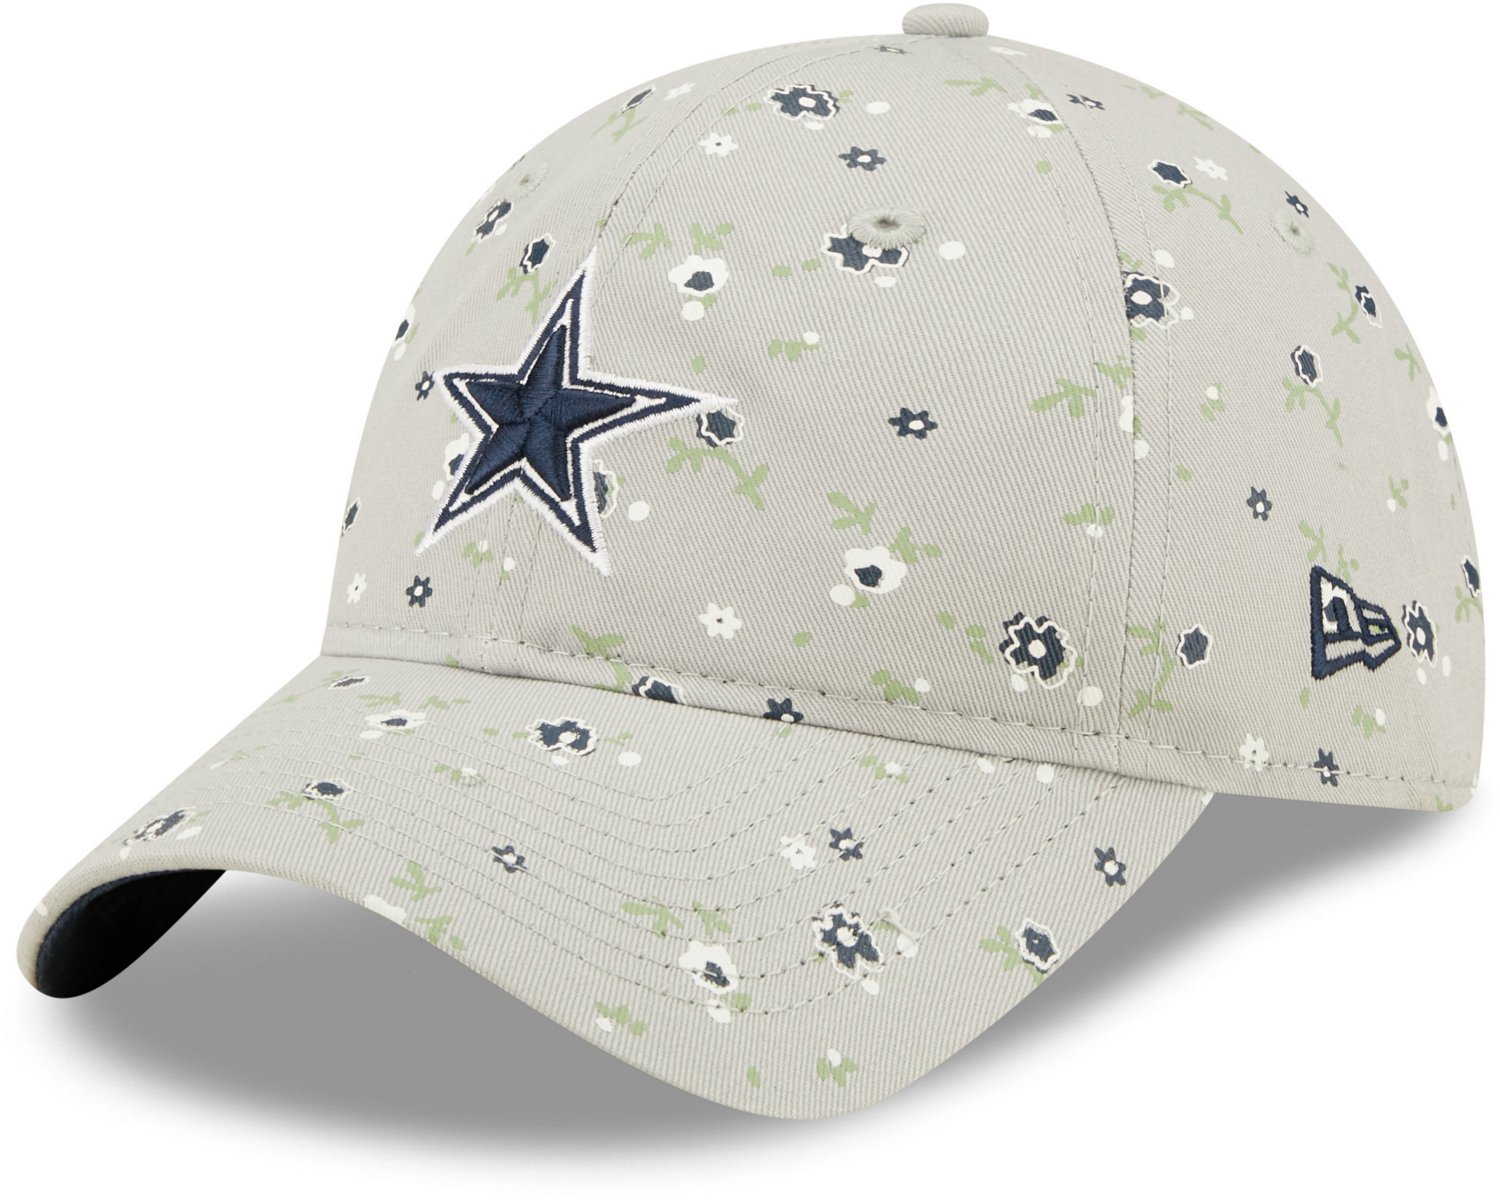 Cowboys track and field cap